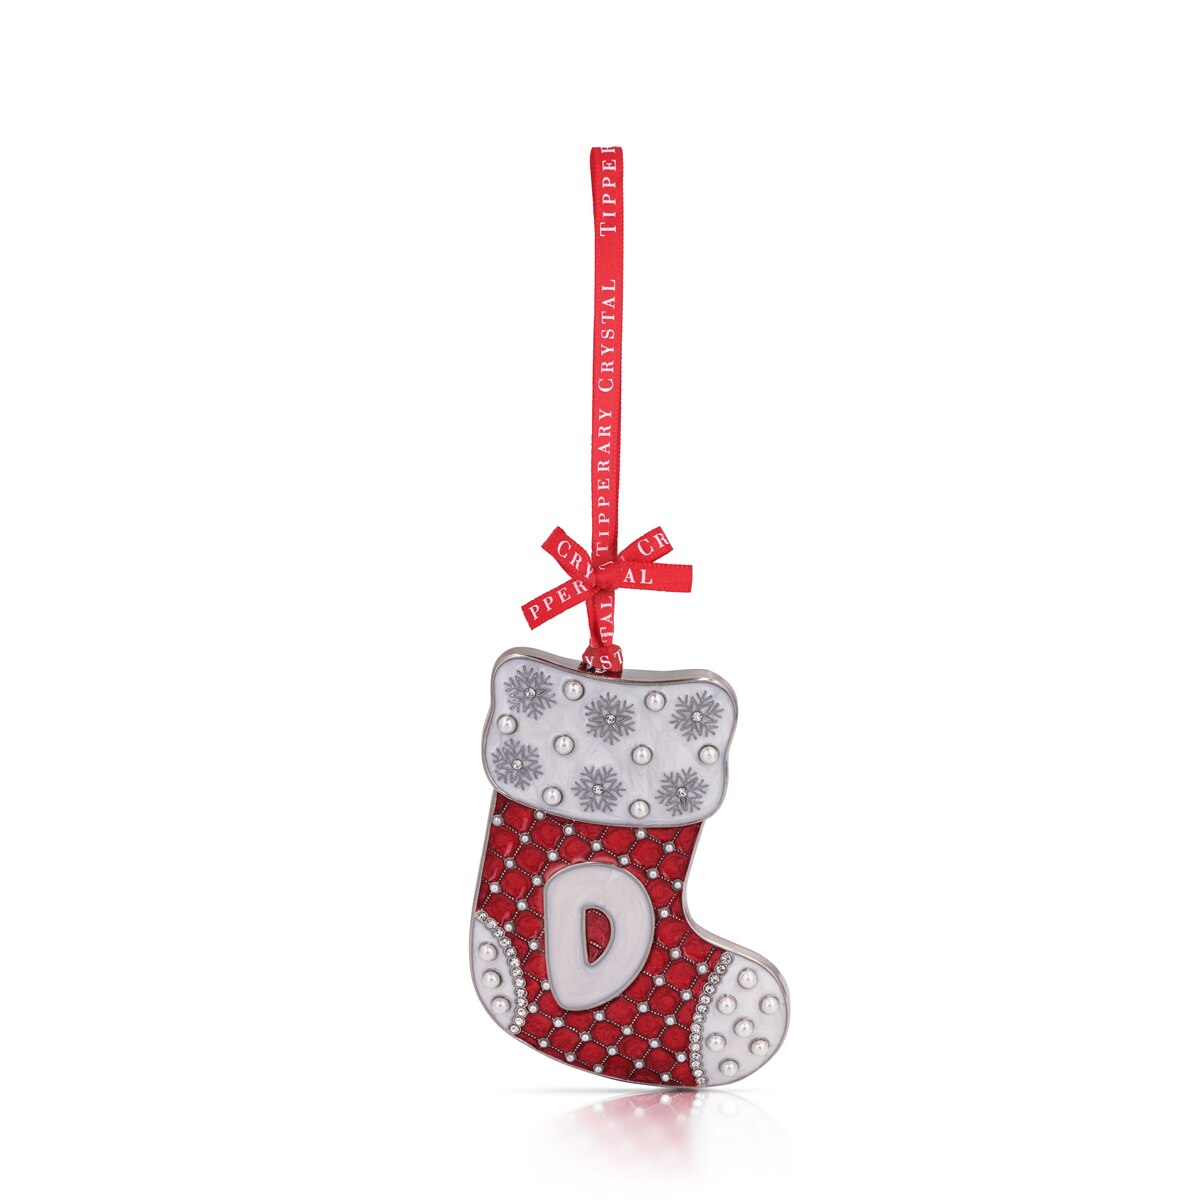 Tipperary Crystal Alphabet Stocking Christmas Decoration - D - Last chance to buy